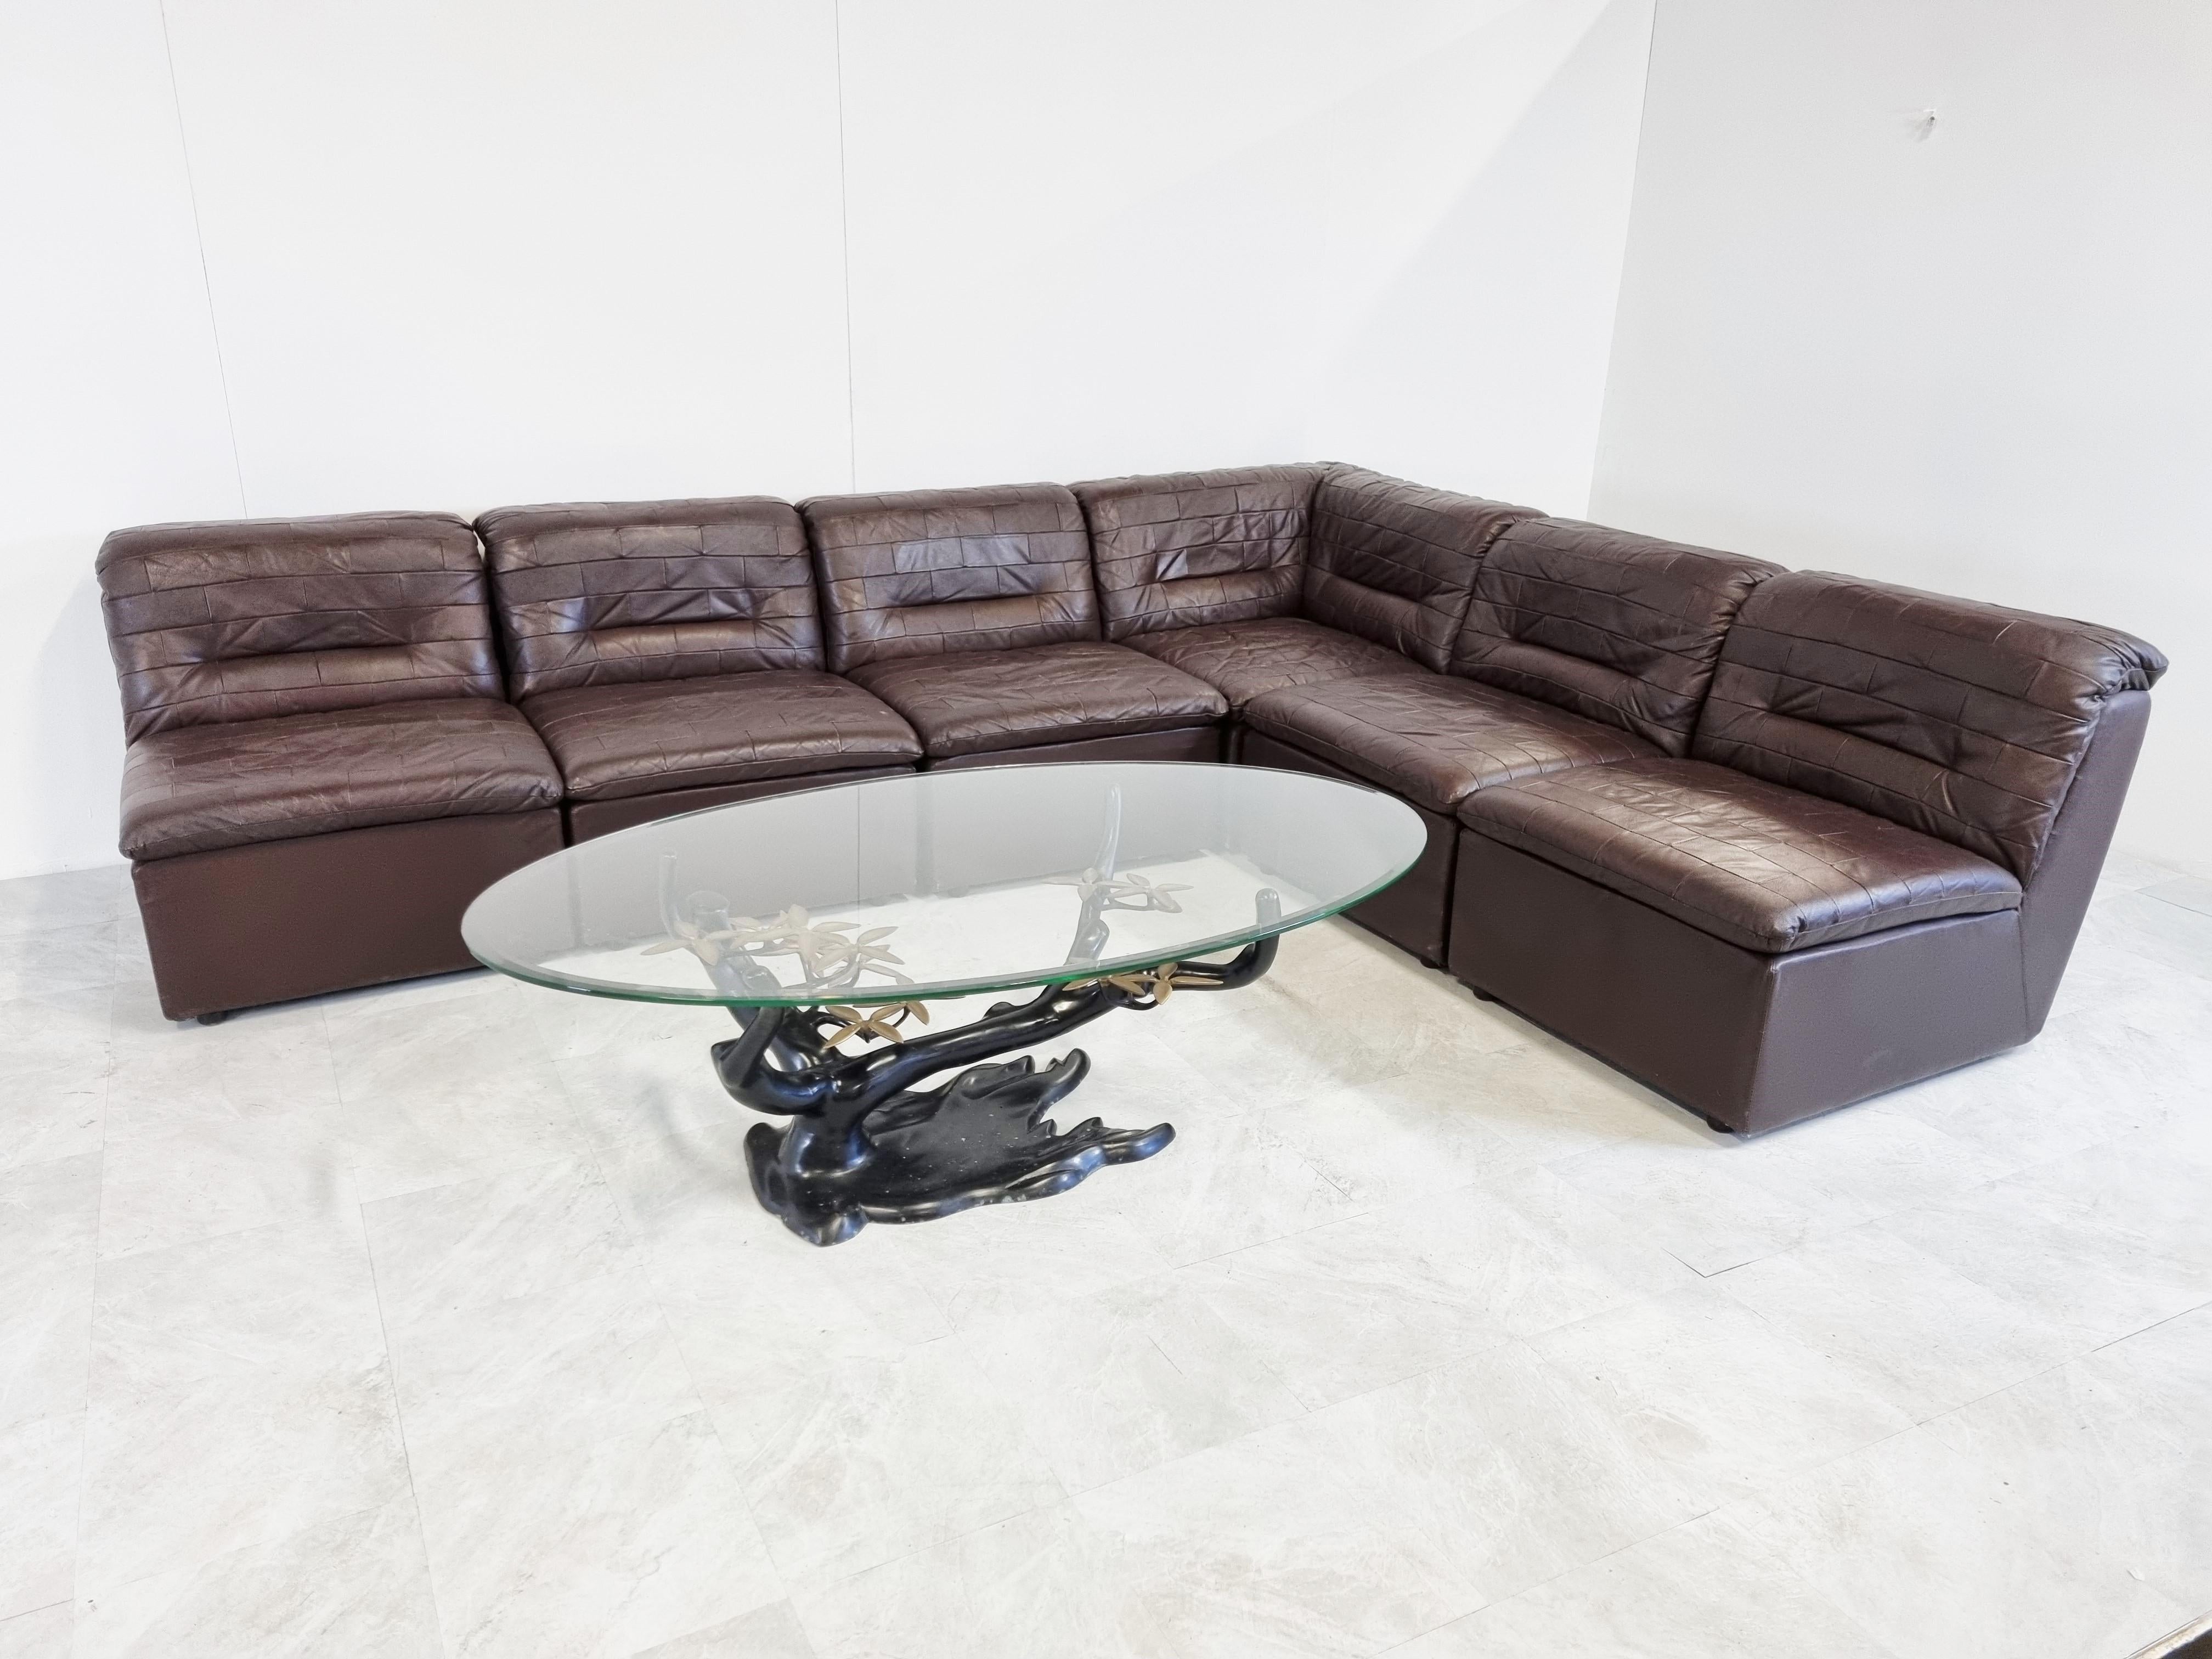 Mid century sectional/modular sofa set in beautifully patchwork chocolate brown leather.

The sofa set is completely modular and consists of 7 elements.

Ideal piece to create a free standing sofa space which will be the center piece of your